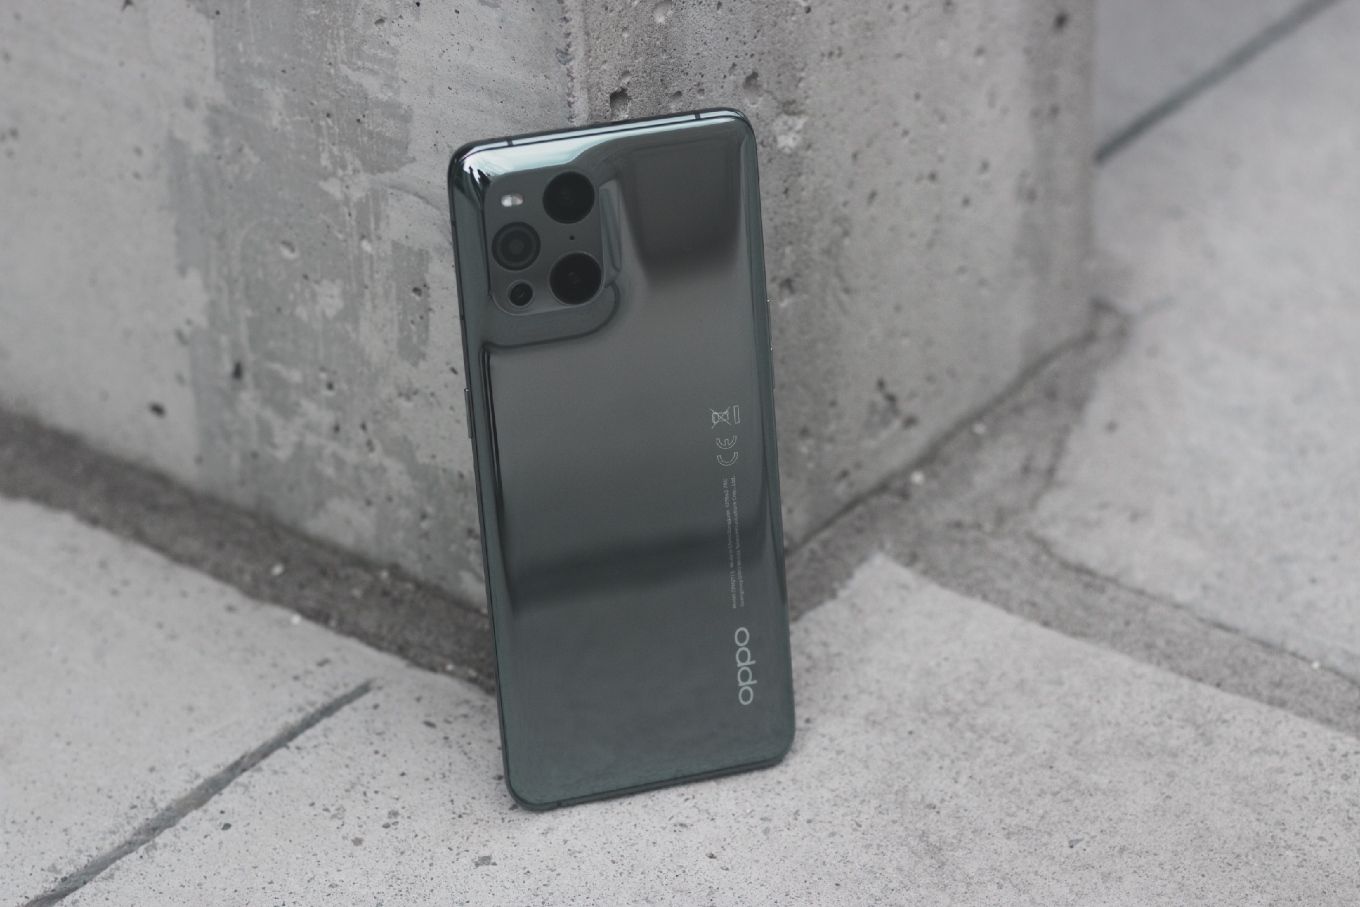 Oppo Find X3 Pro against wall